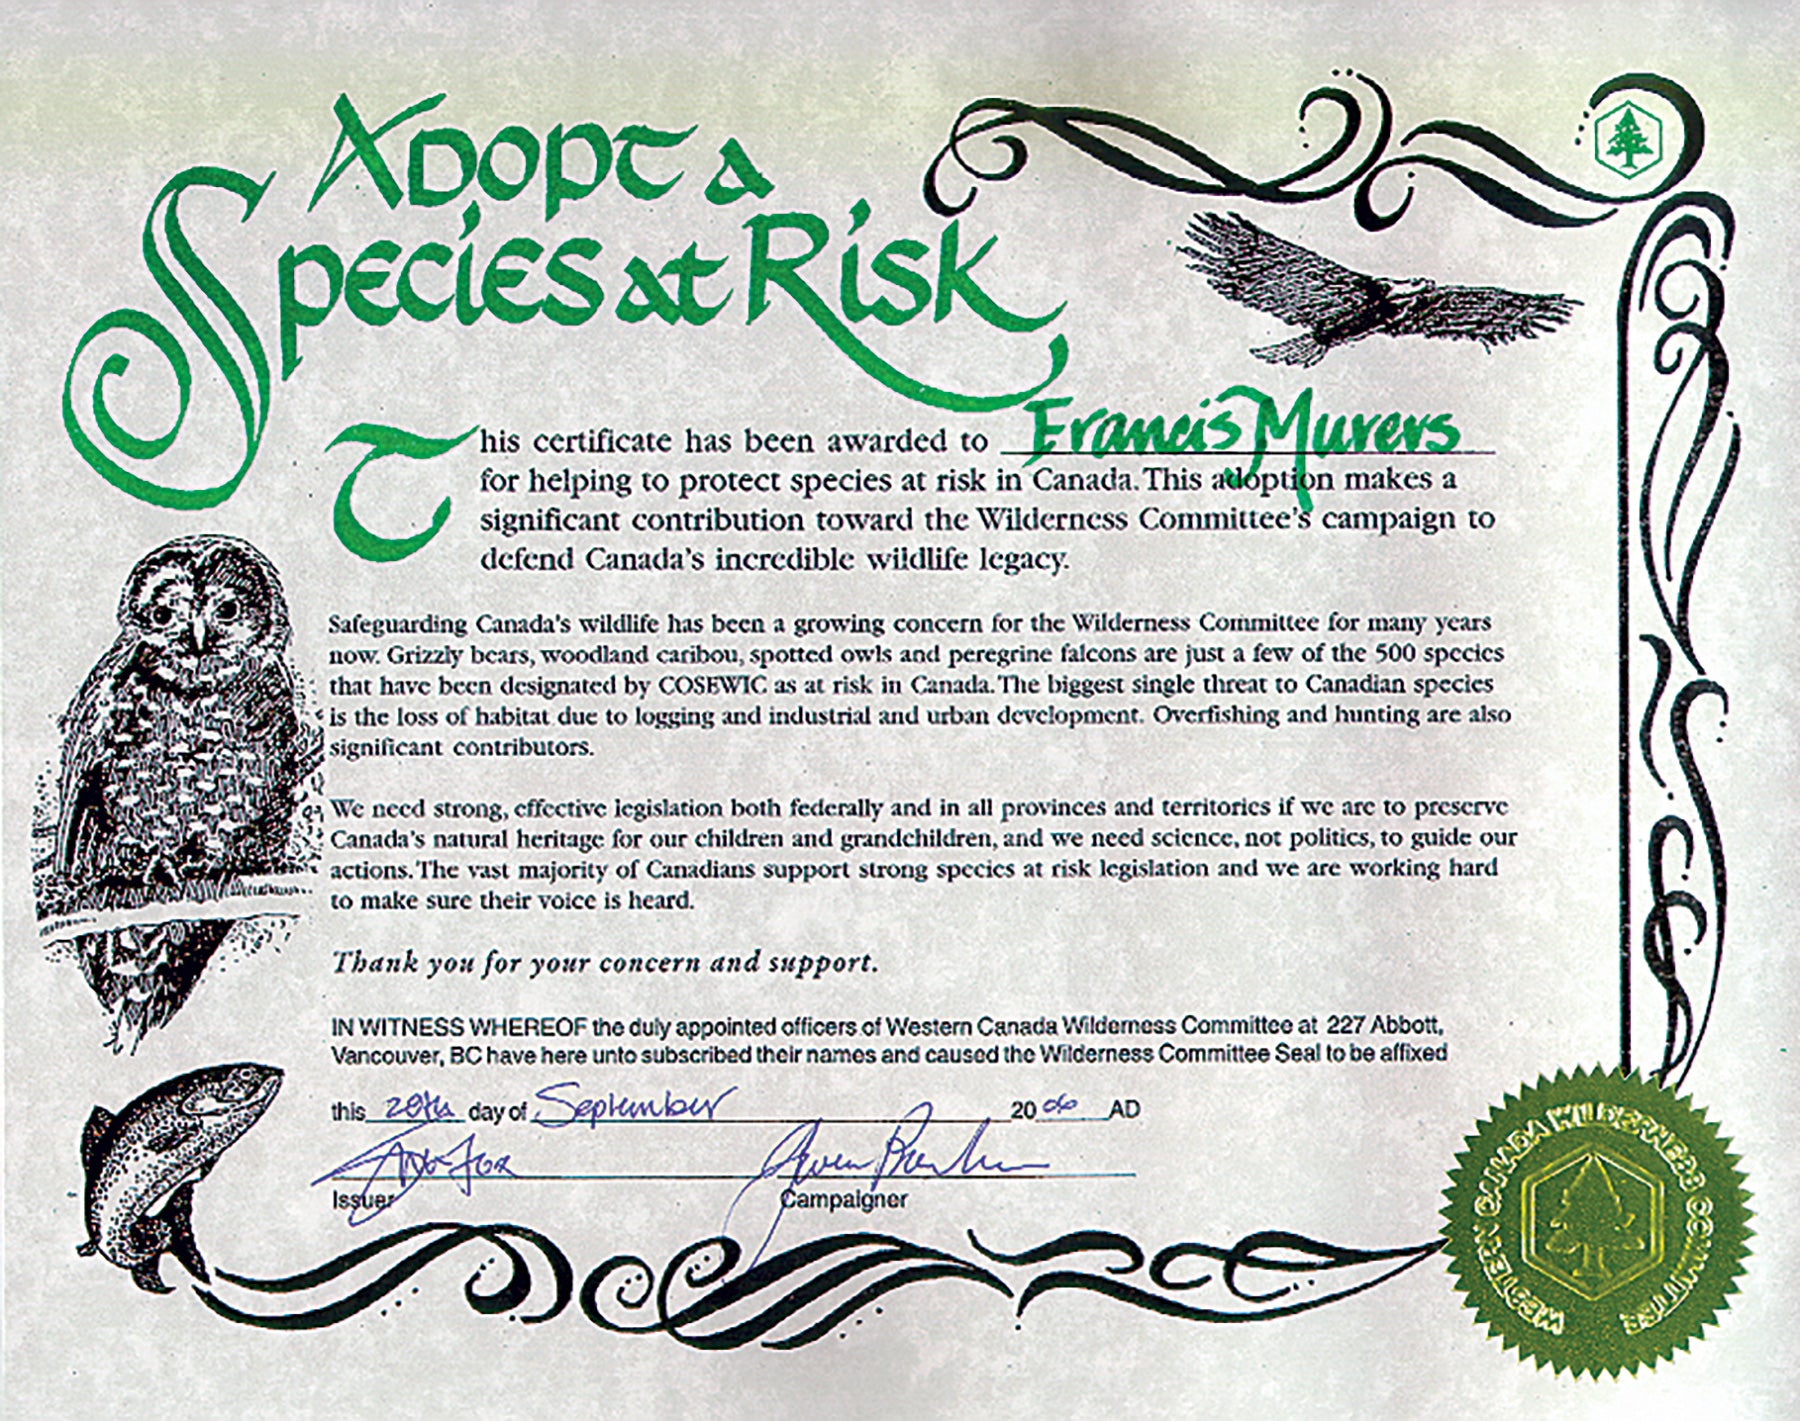 Adopt-a-Species at Risk